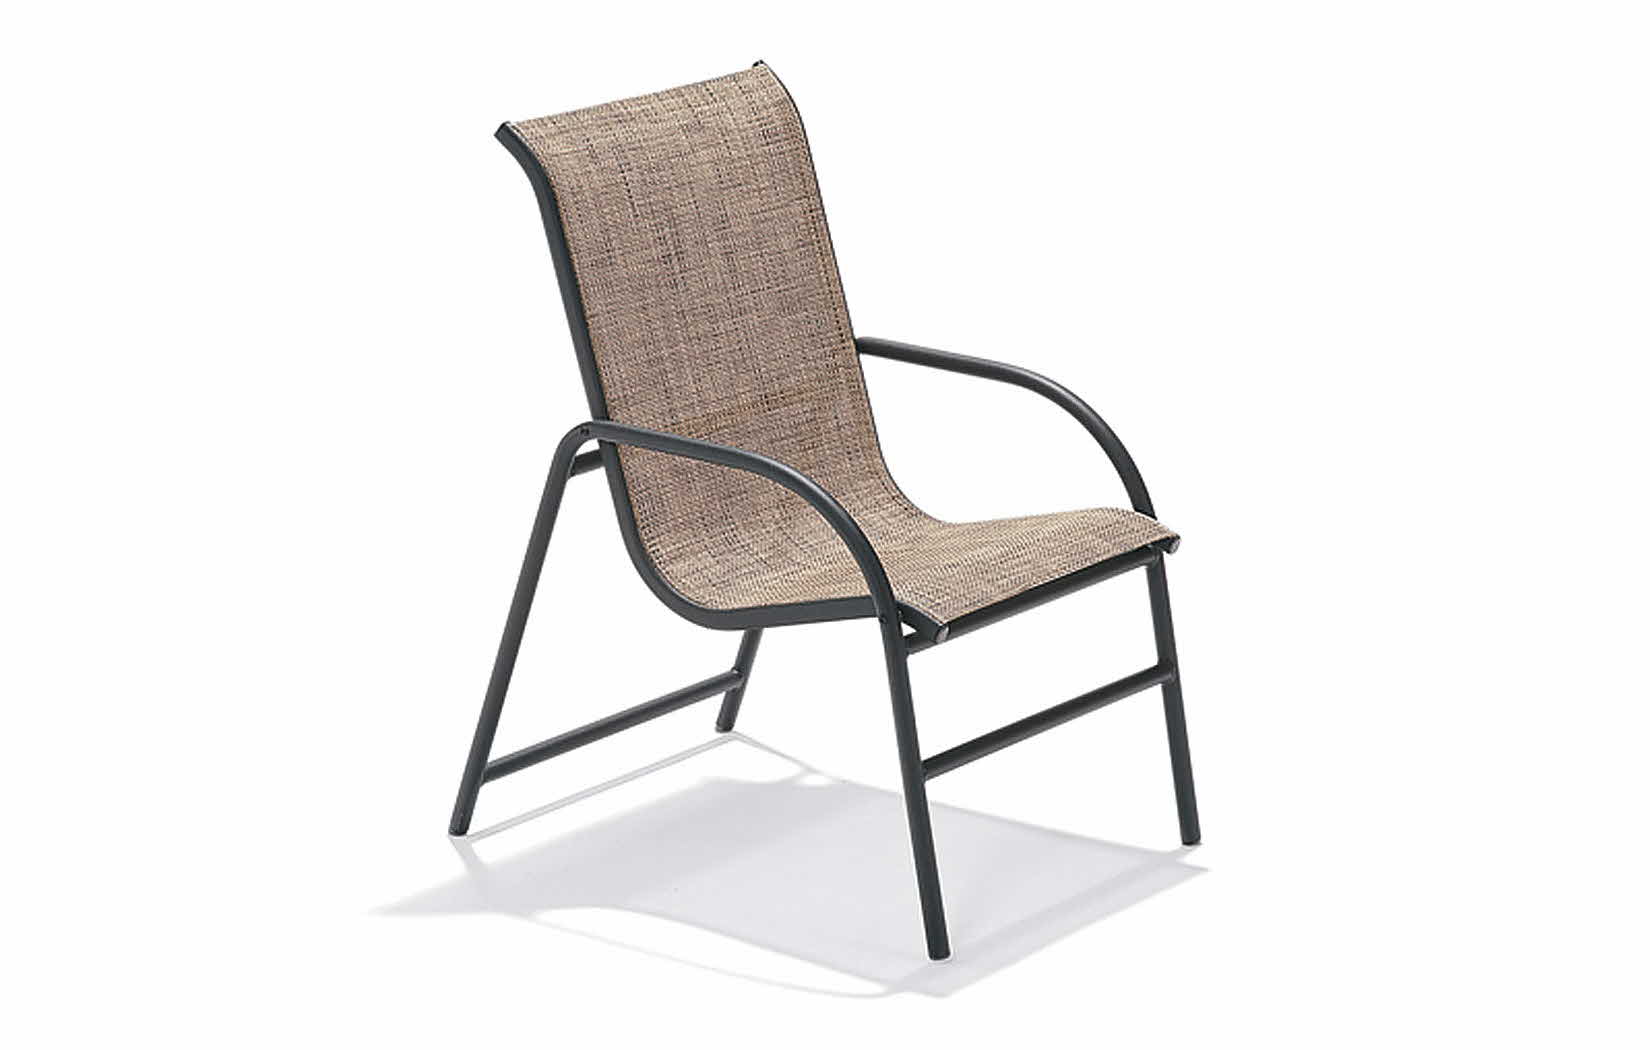 Oasis Sling Collection Nesting Poolside Chair